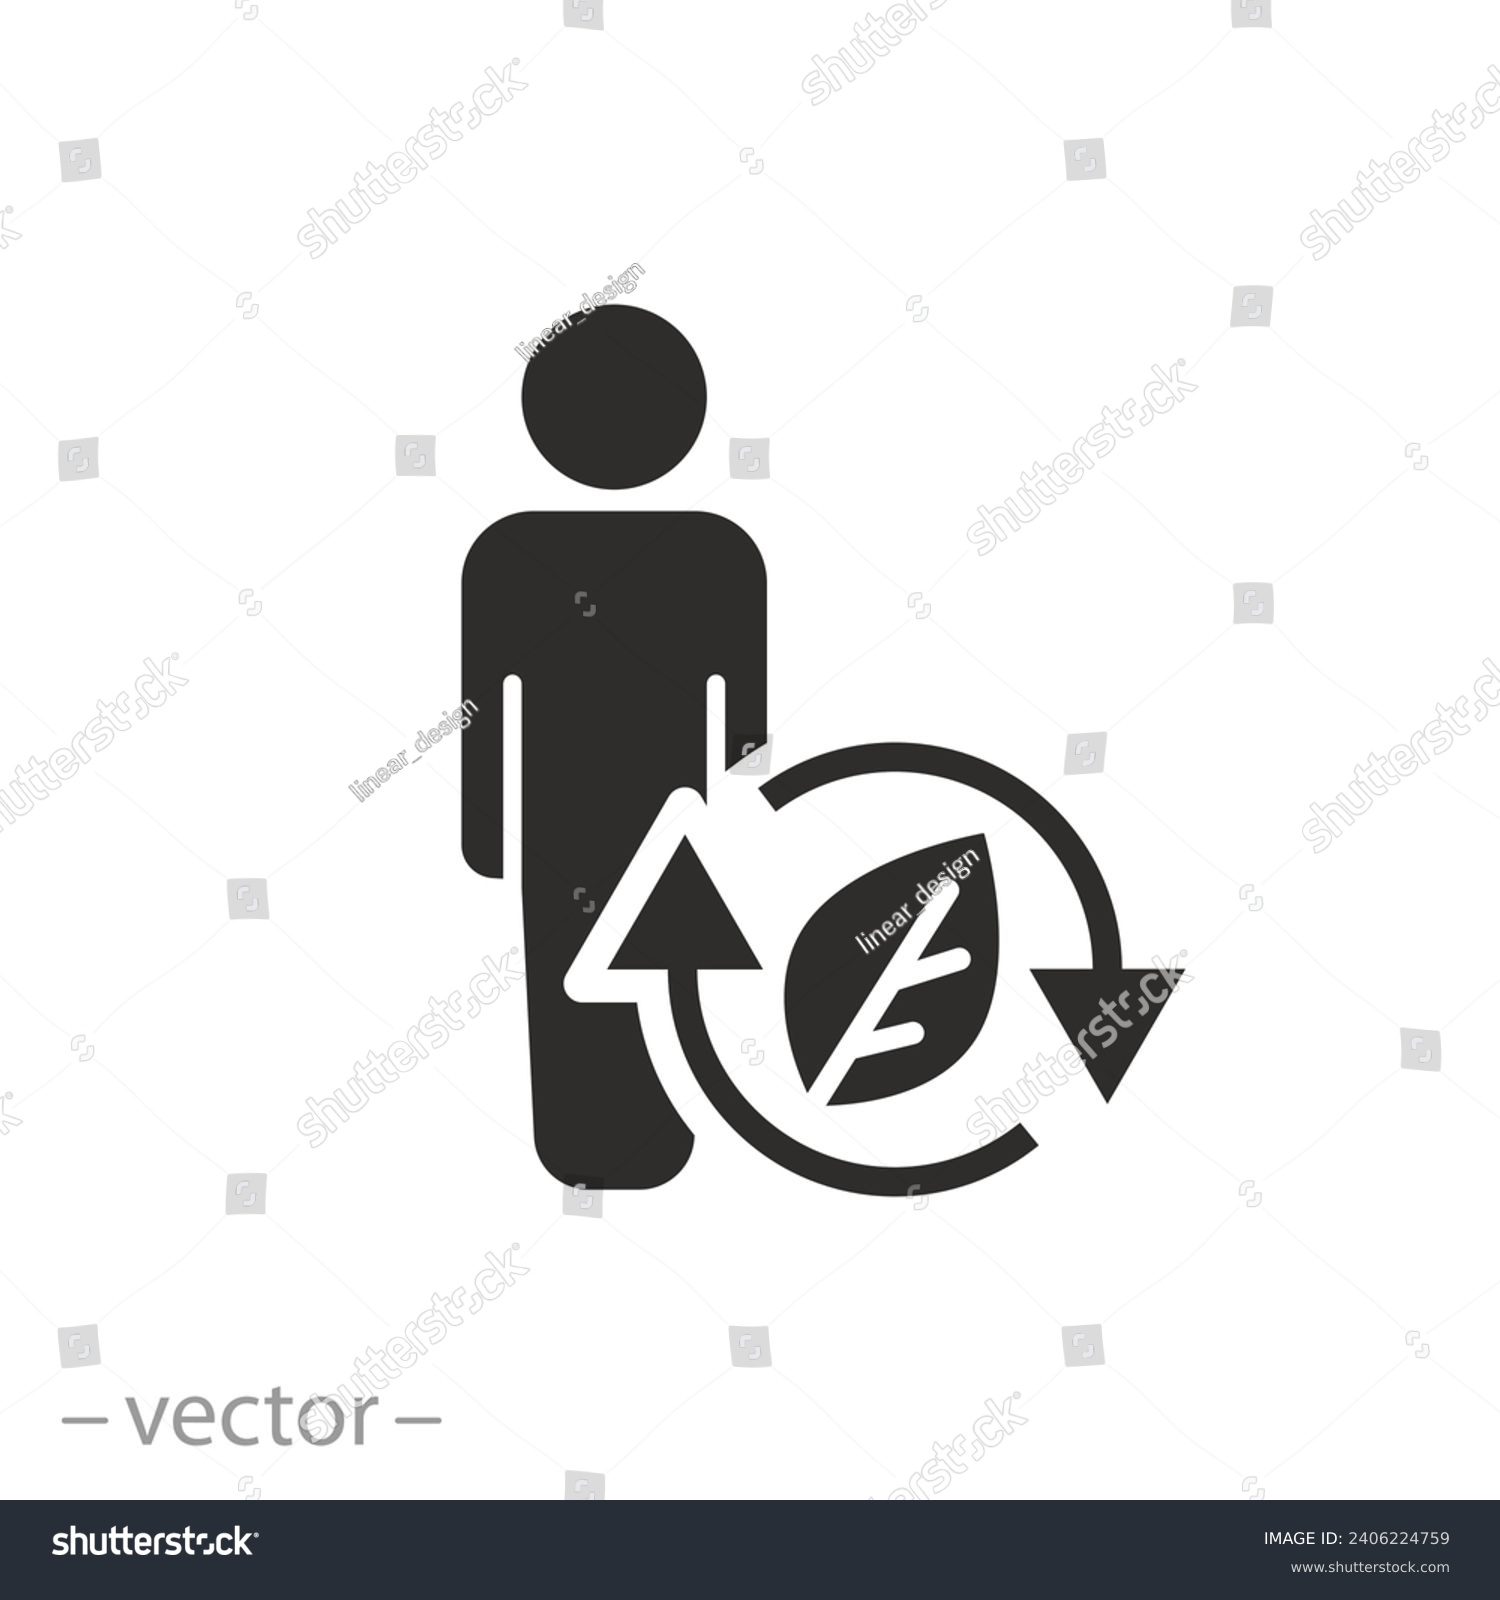 SVG of body human with cleansing process icon, detoxification organism, healthy lifestyle, flat symbol - vector illustration svg